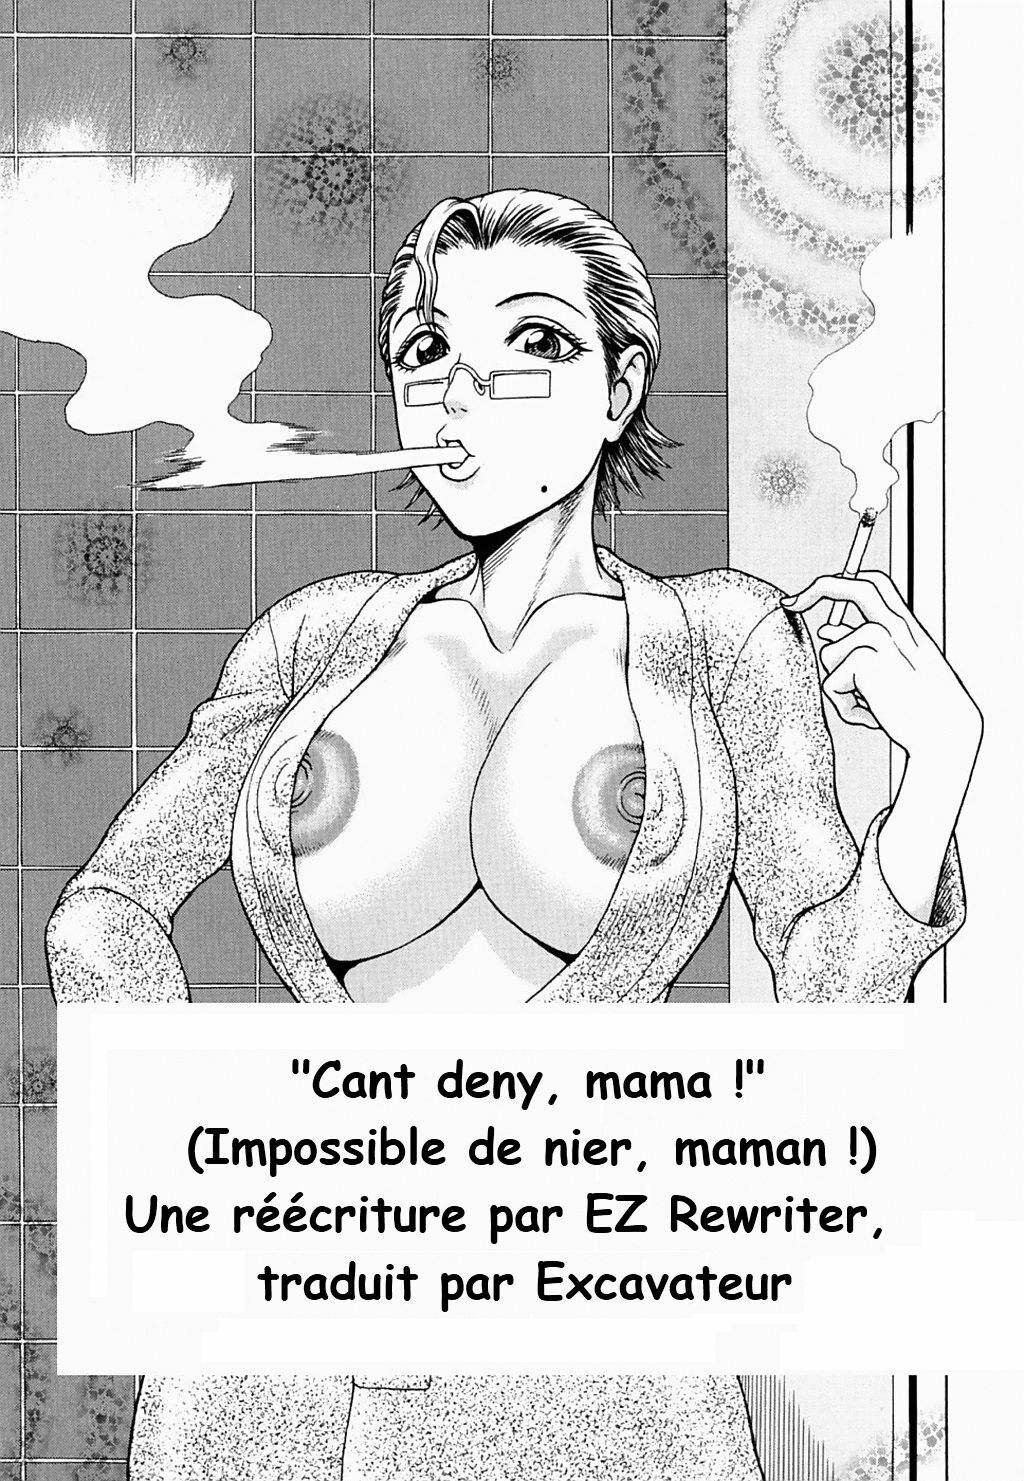 Cant deny, mama! | Impossible de nier, maman! [French] [Rewrite] [Excavateur] page 1 full